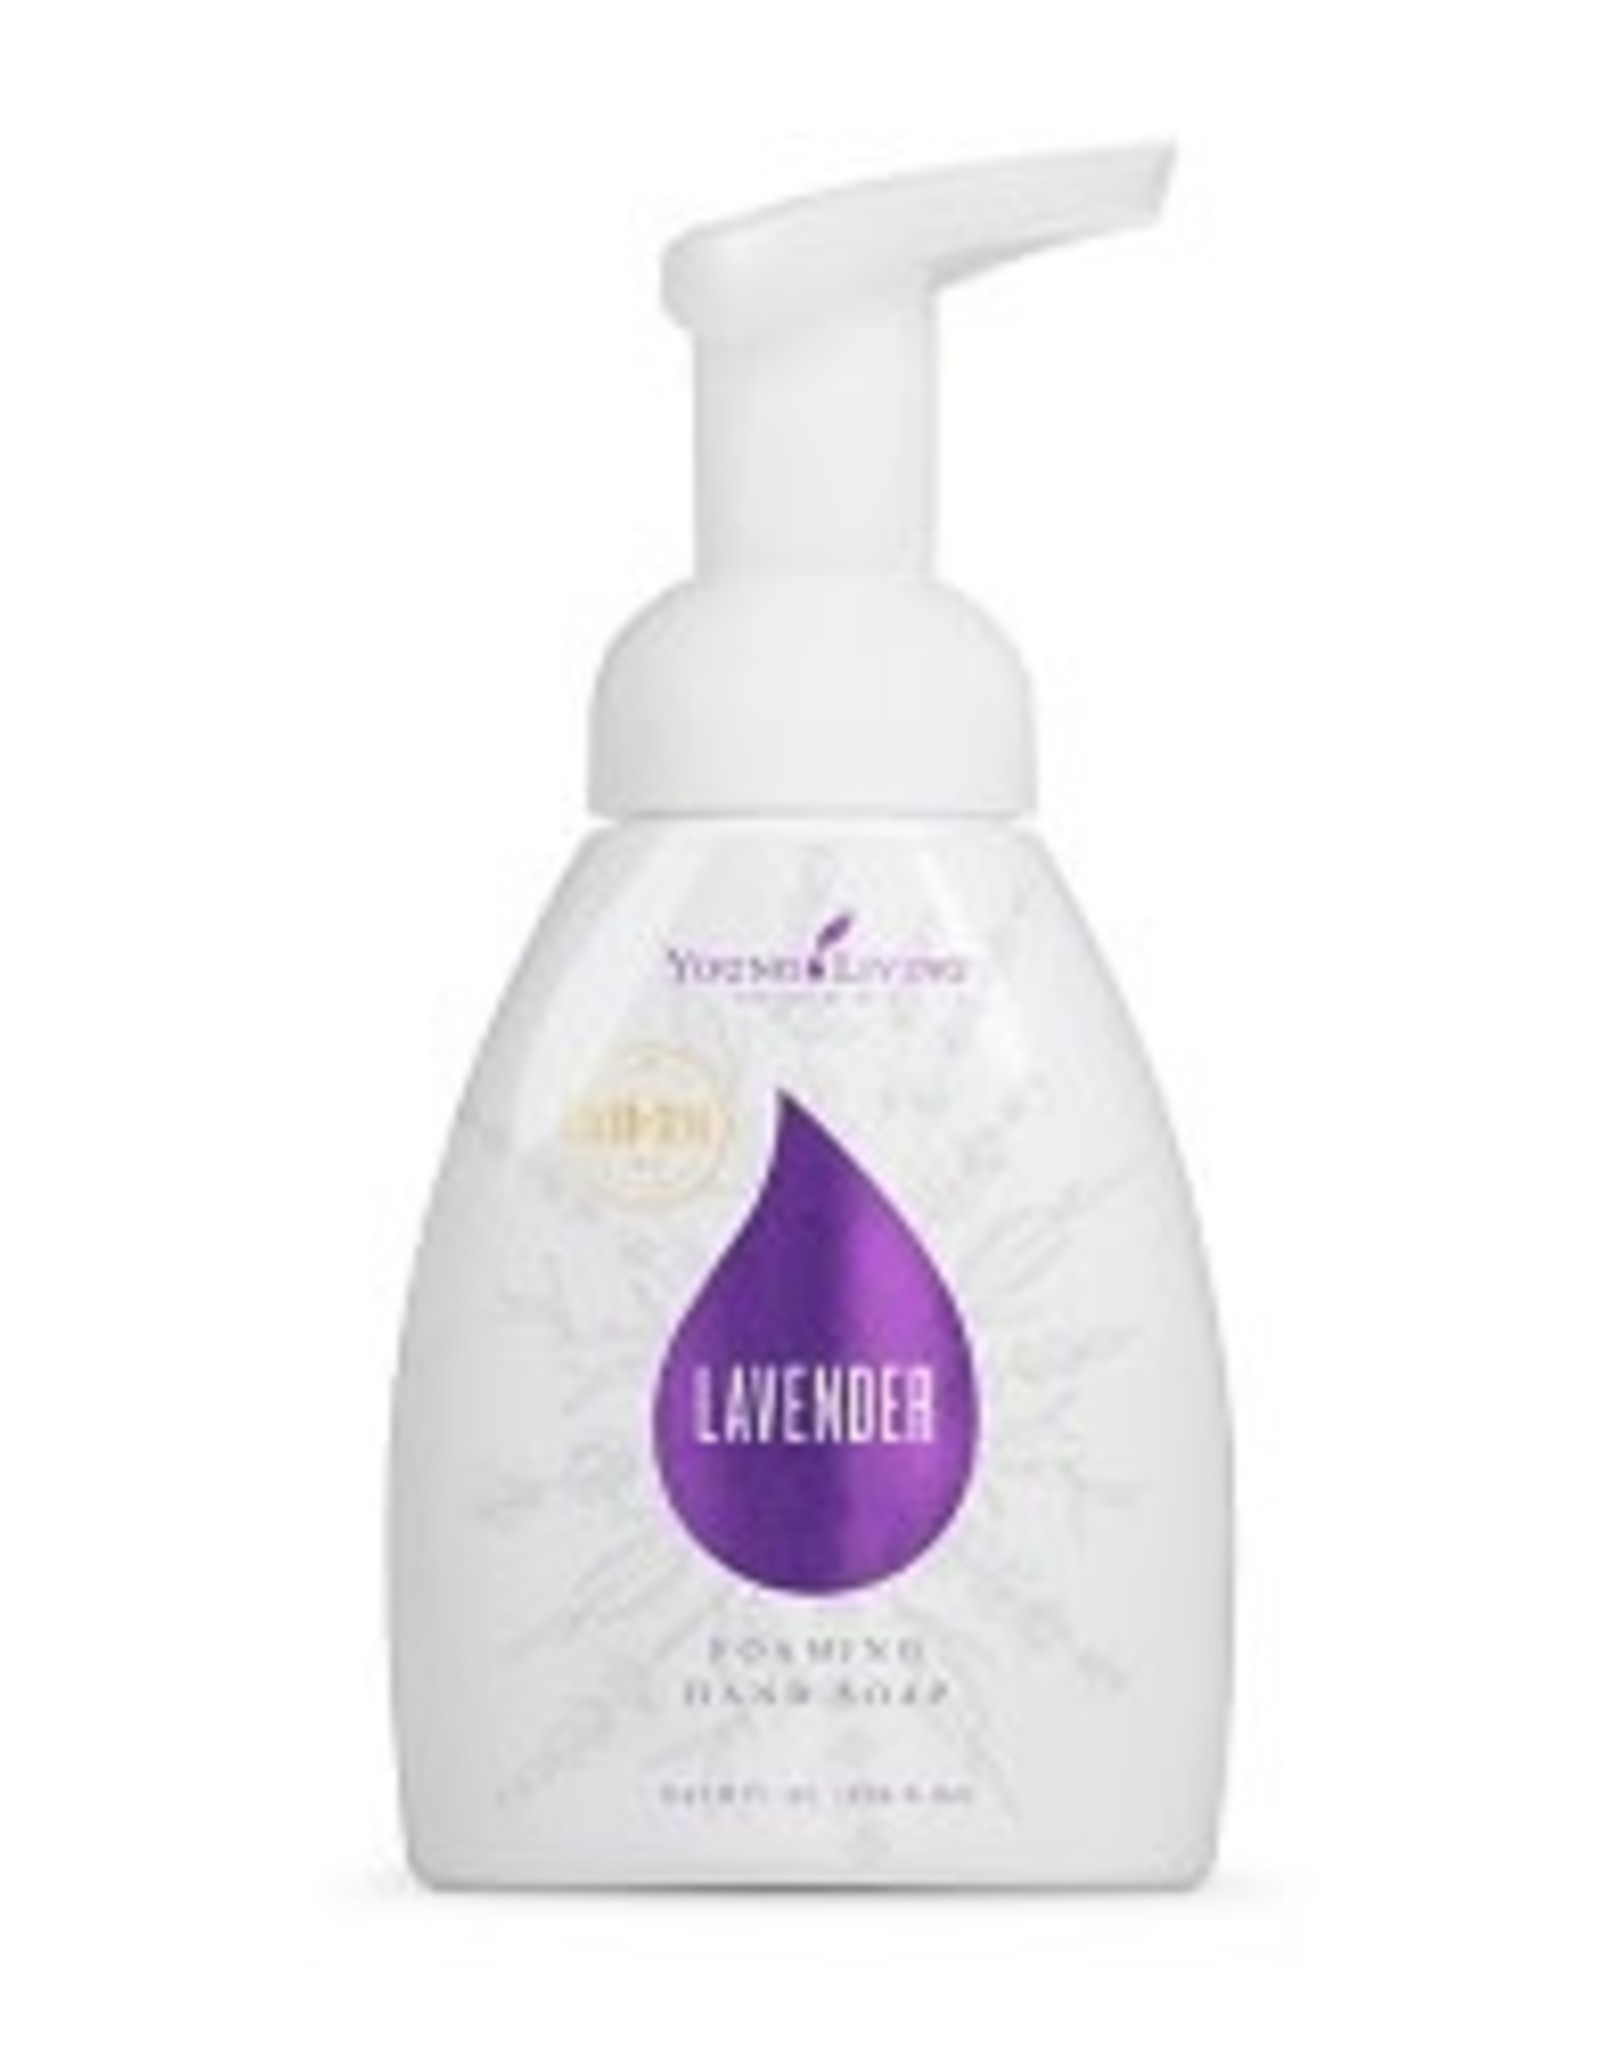 Young Living Lavender Foaming Hand Soap (8oz)